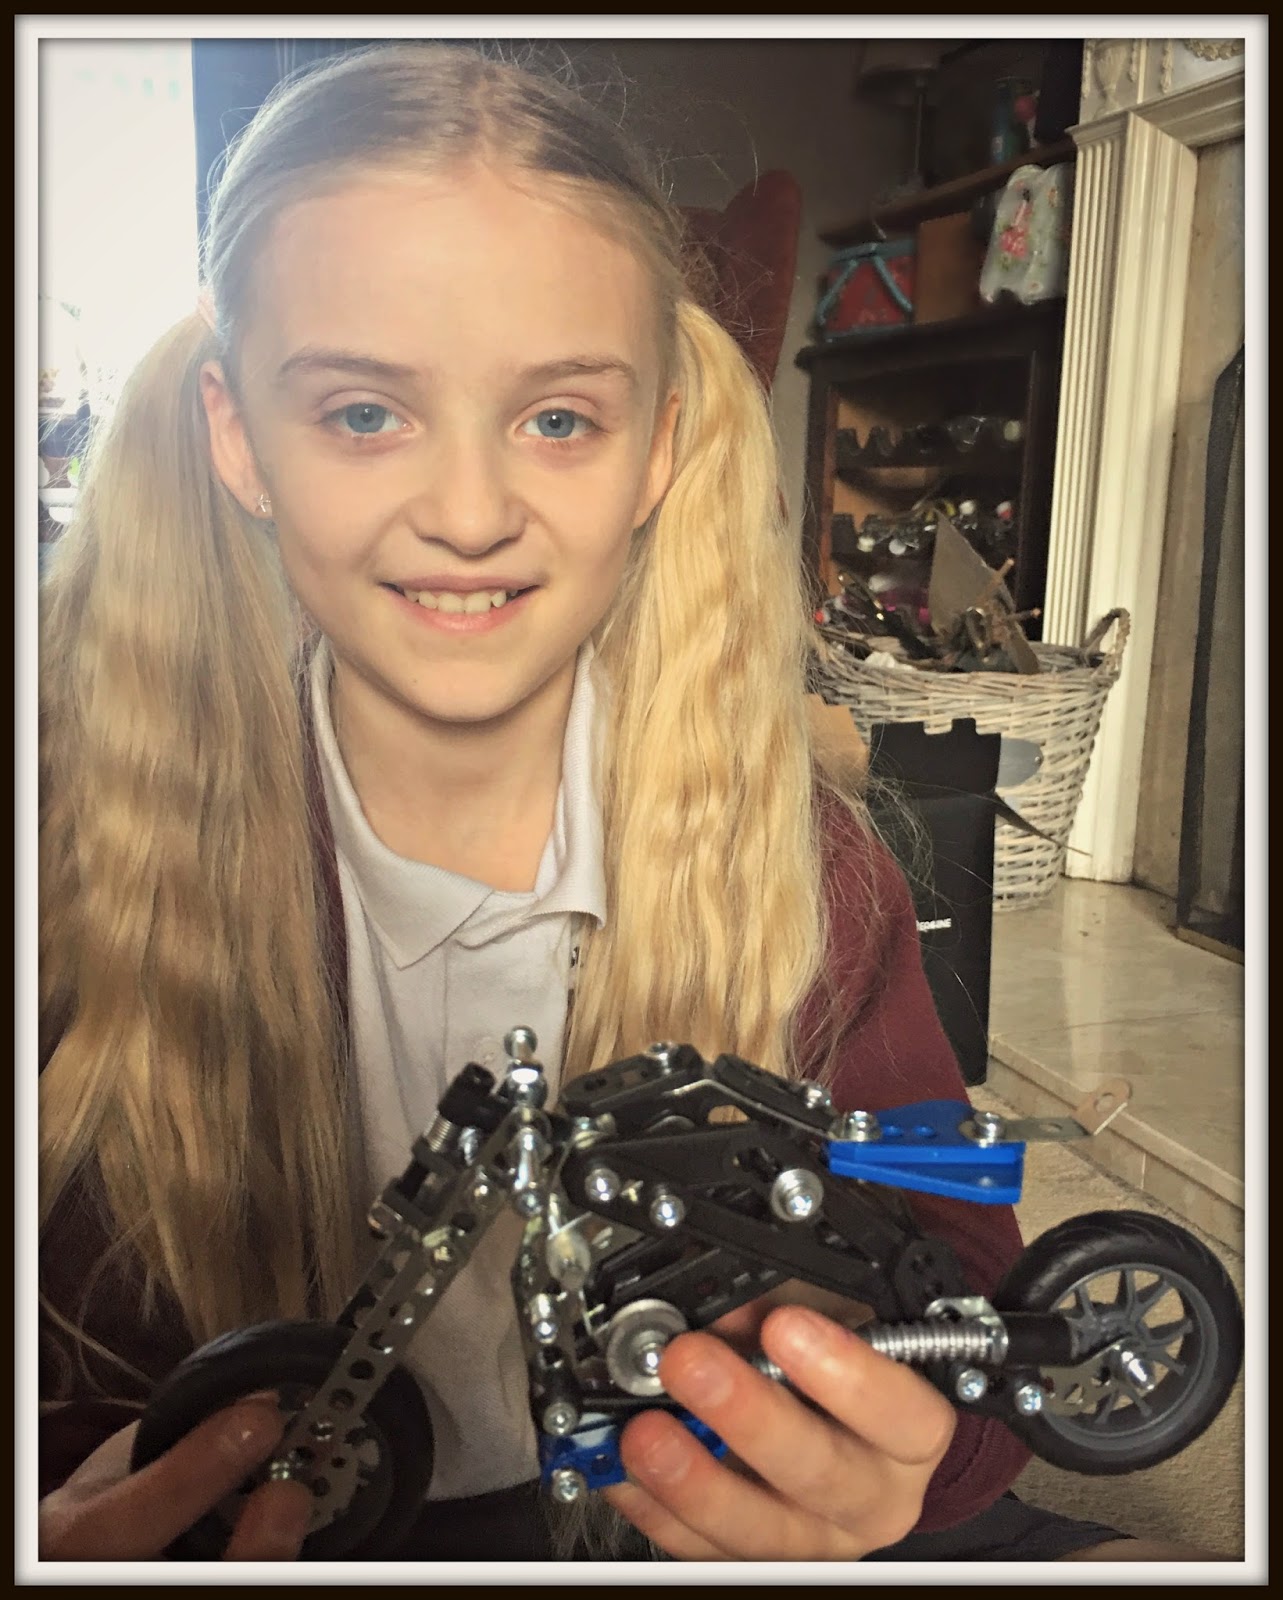 Meccano 5-in-1 Motorcycle Set Review - Cotswold Mum